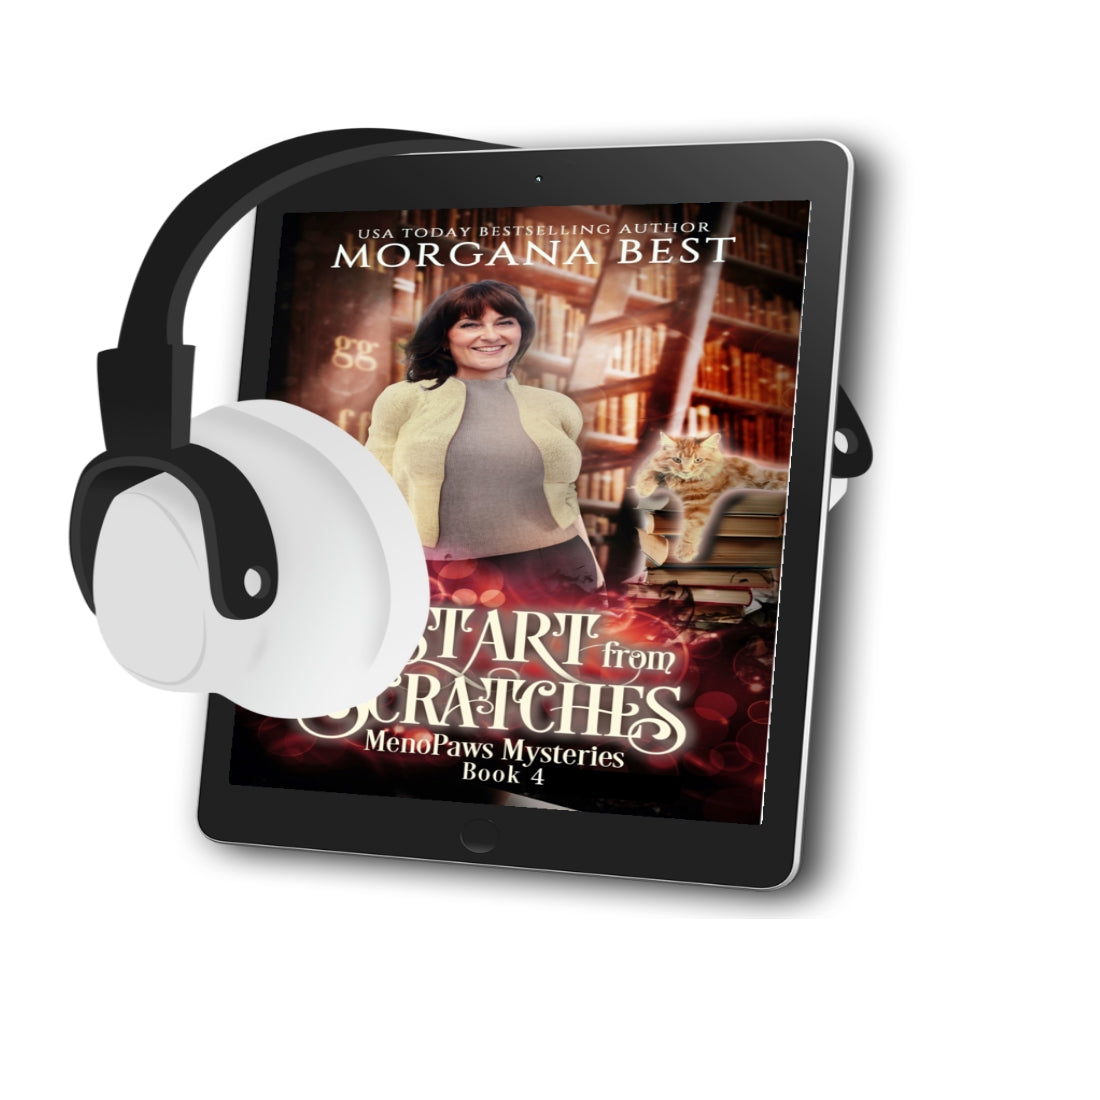 Start from Scratches AUDIOBOOK paranormal womens fiction cozy mystery morgana best